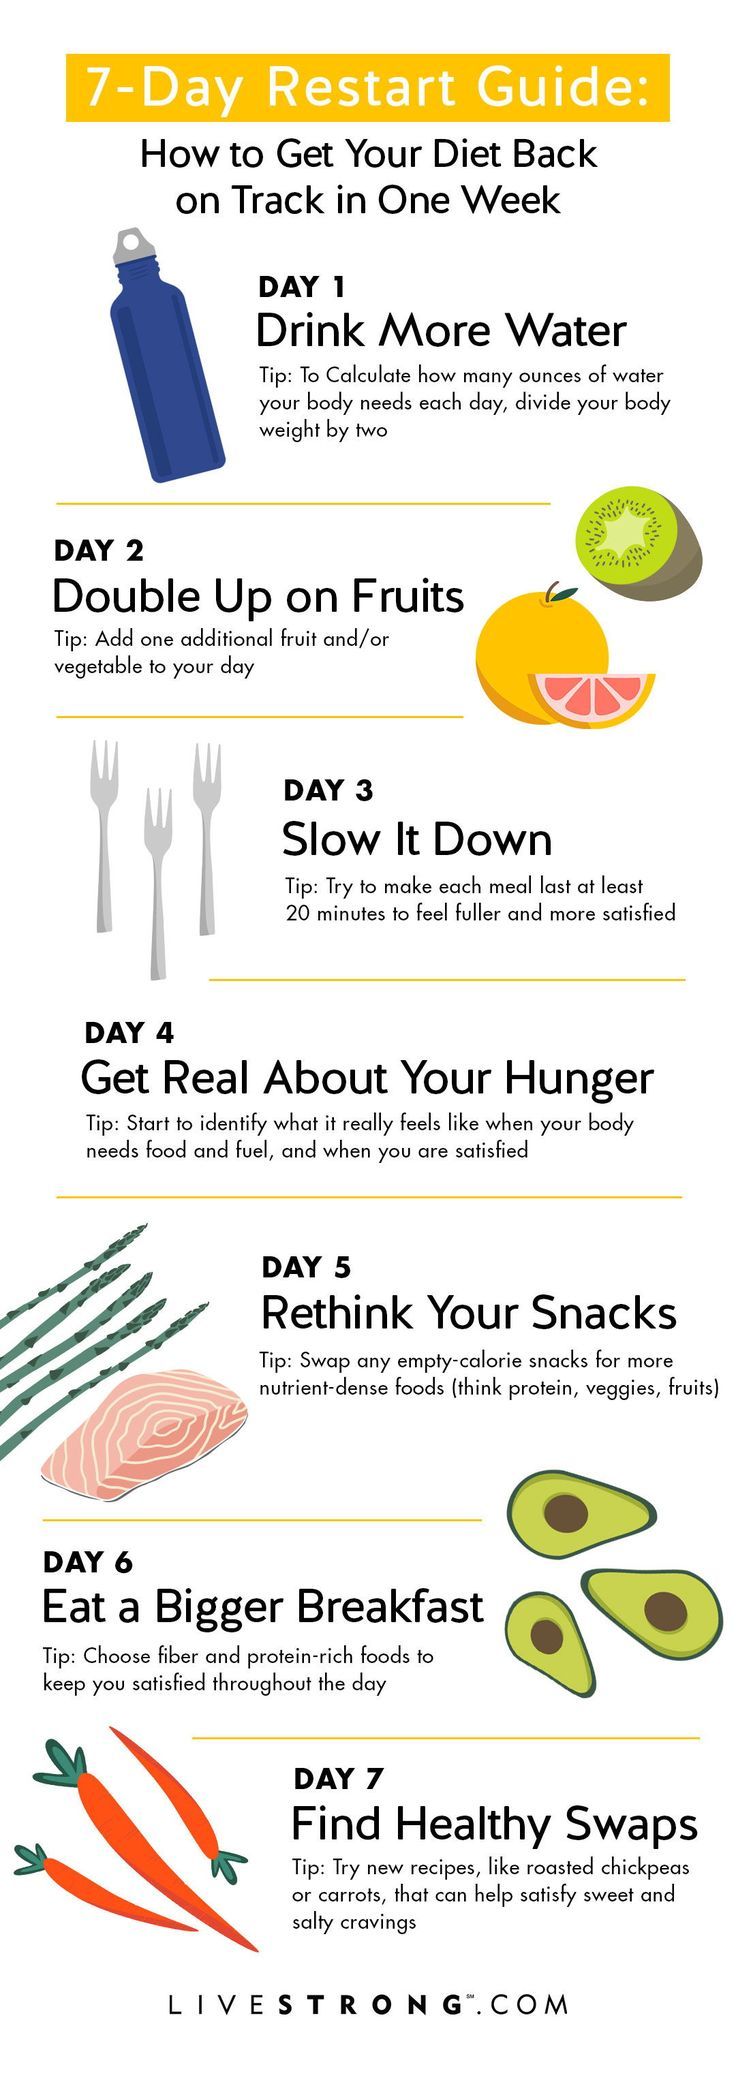 Your One-Week Plan to Get Your Diet Back on Track | Livestrong.com